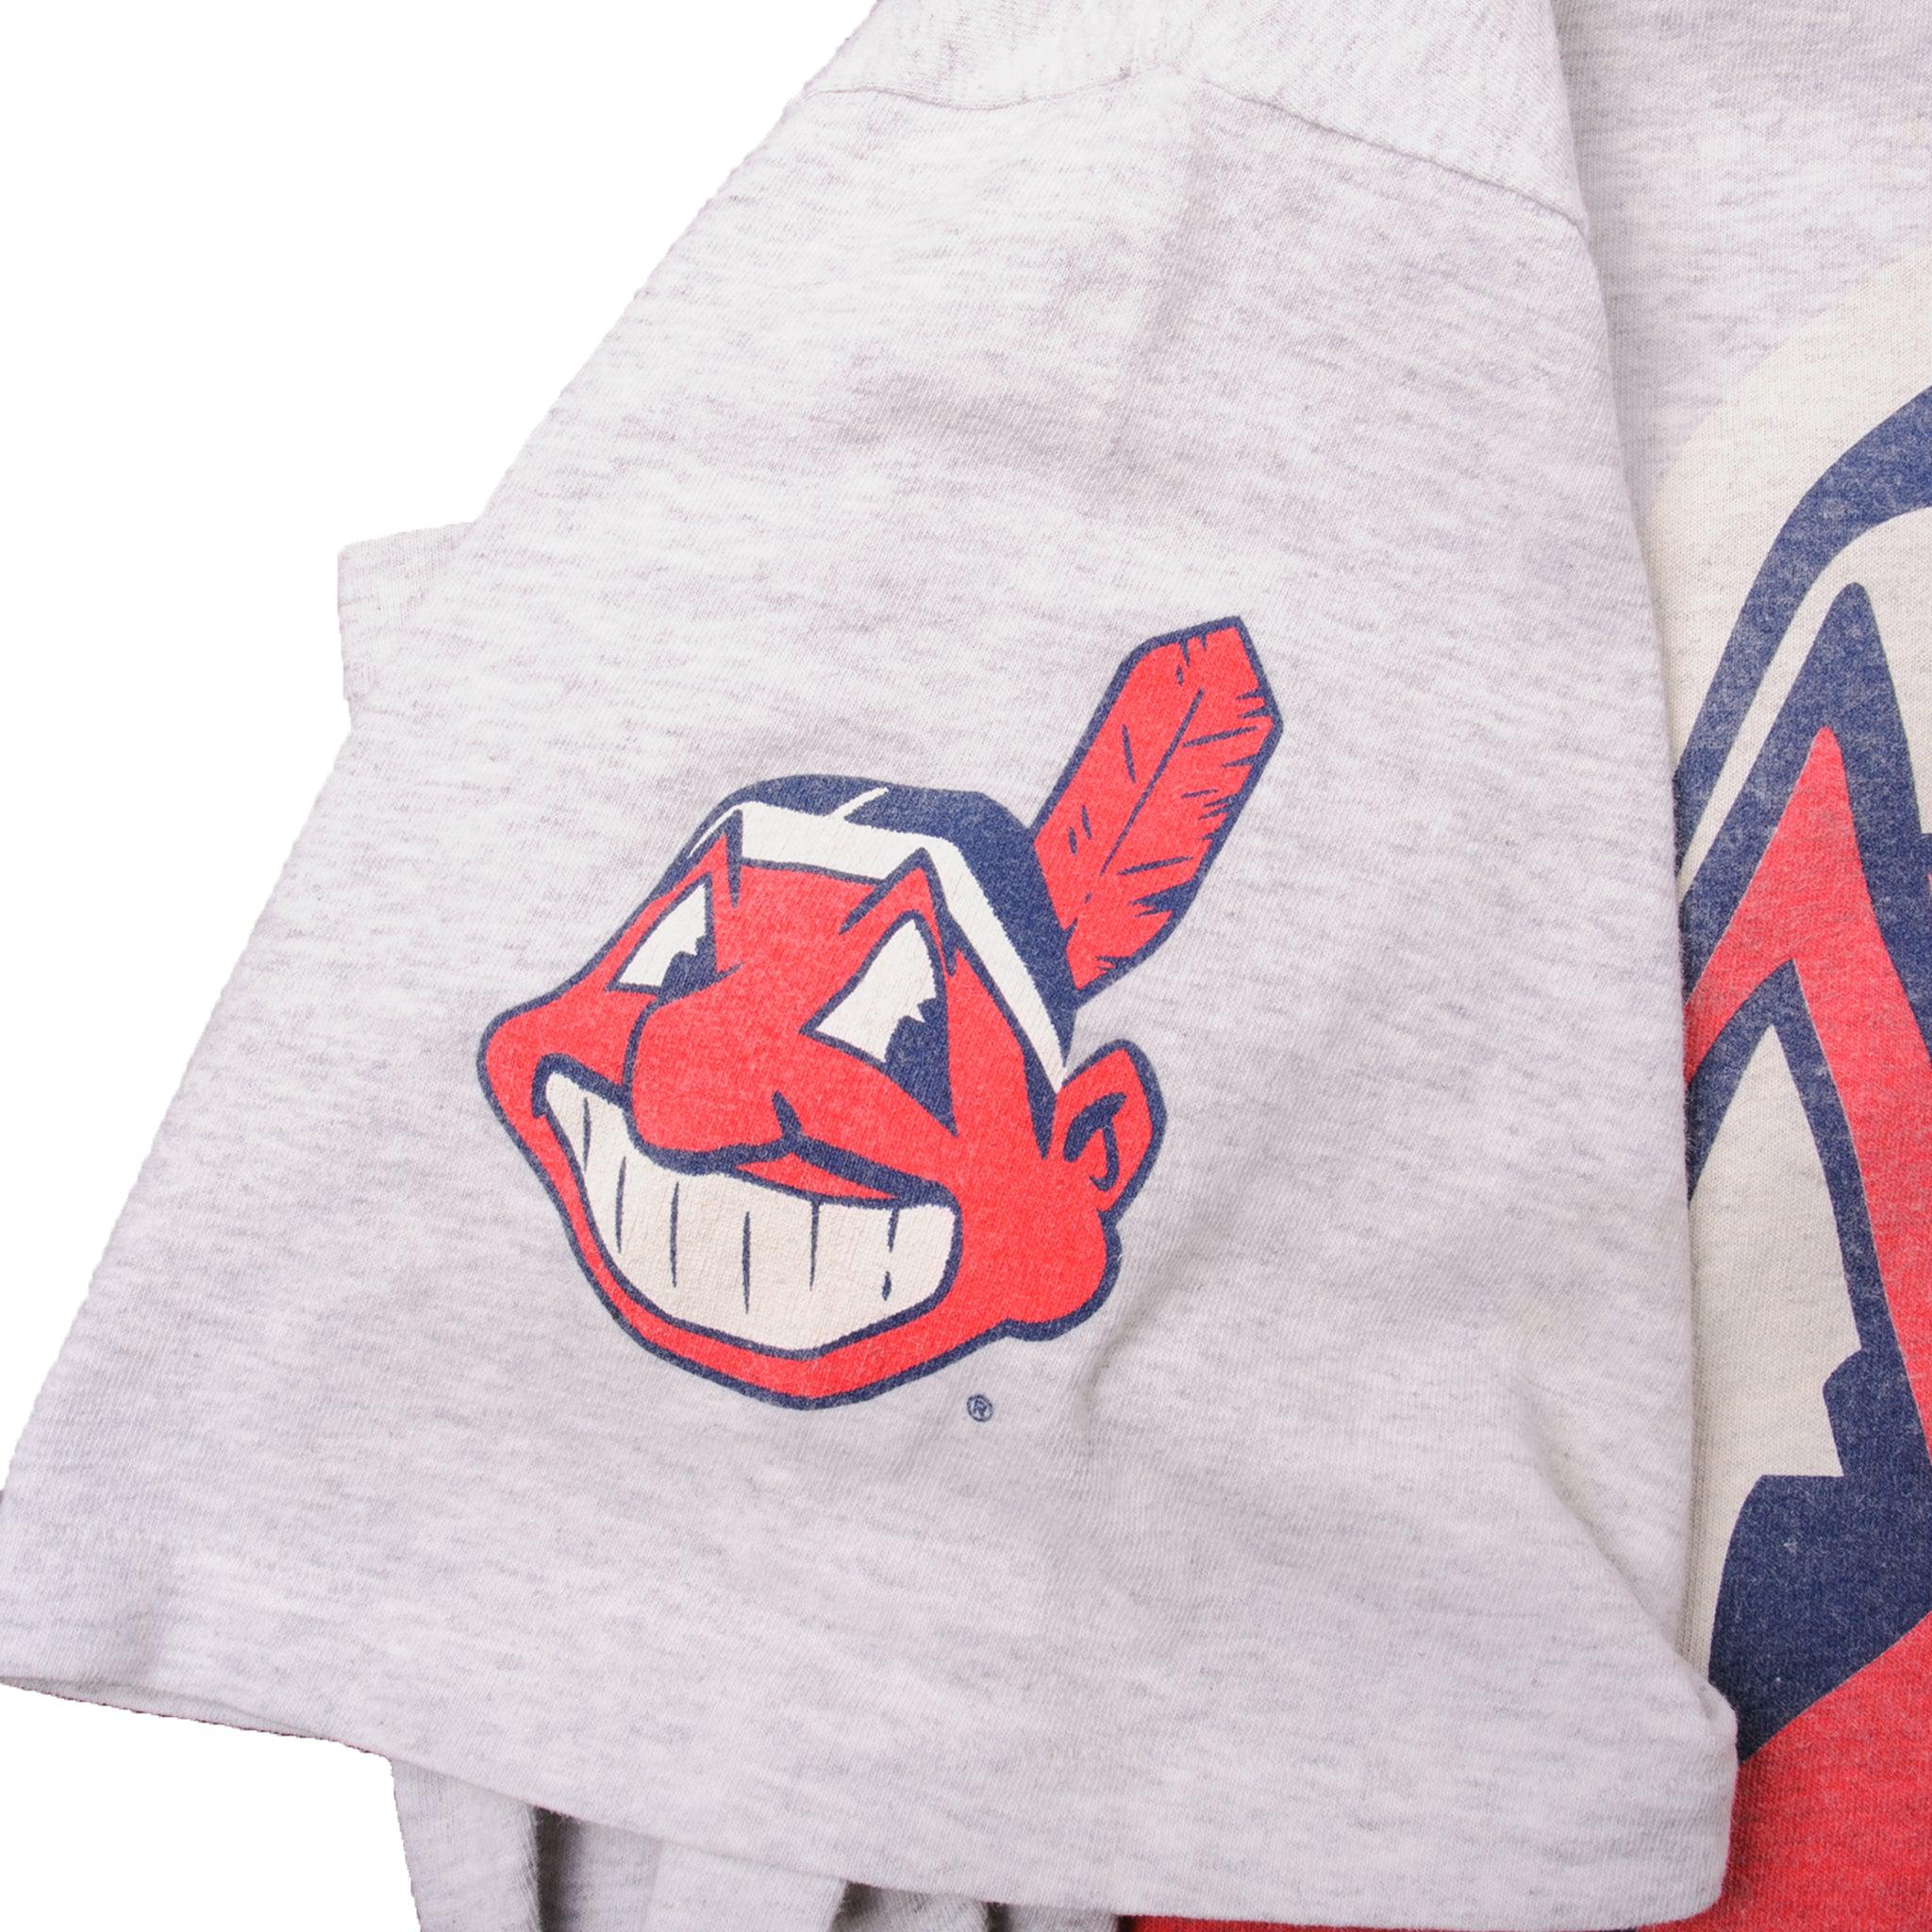 VINTAGE MLB CLEVELAND INDIANS WITH CHIEF WAHOO TEE SHIRT 1995 SIZE 2XL MADE  IN USA